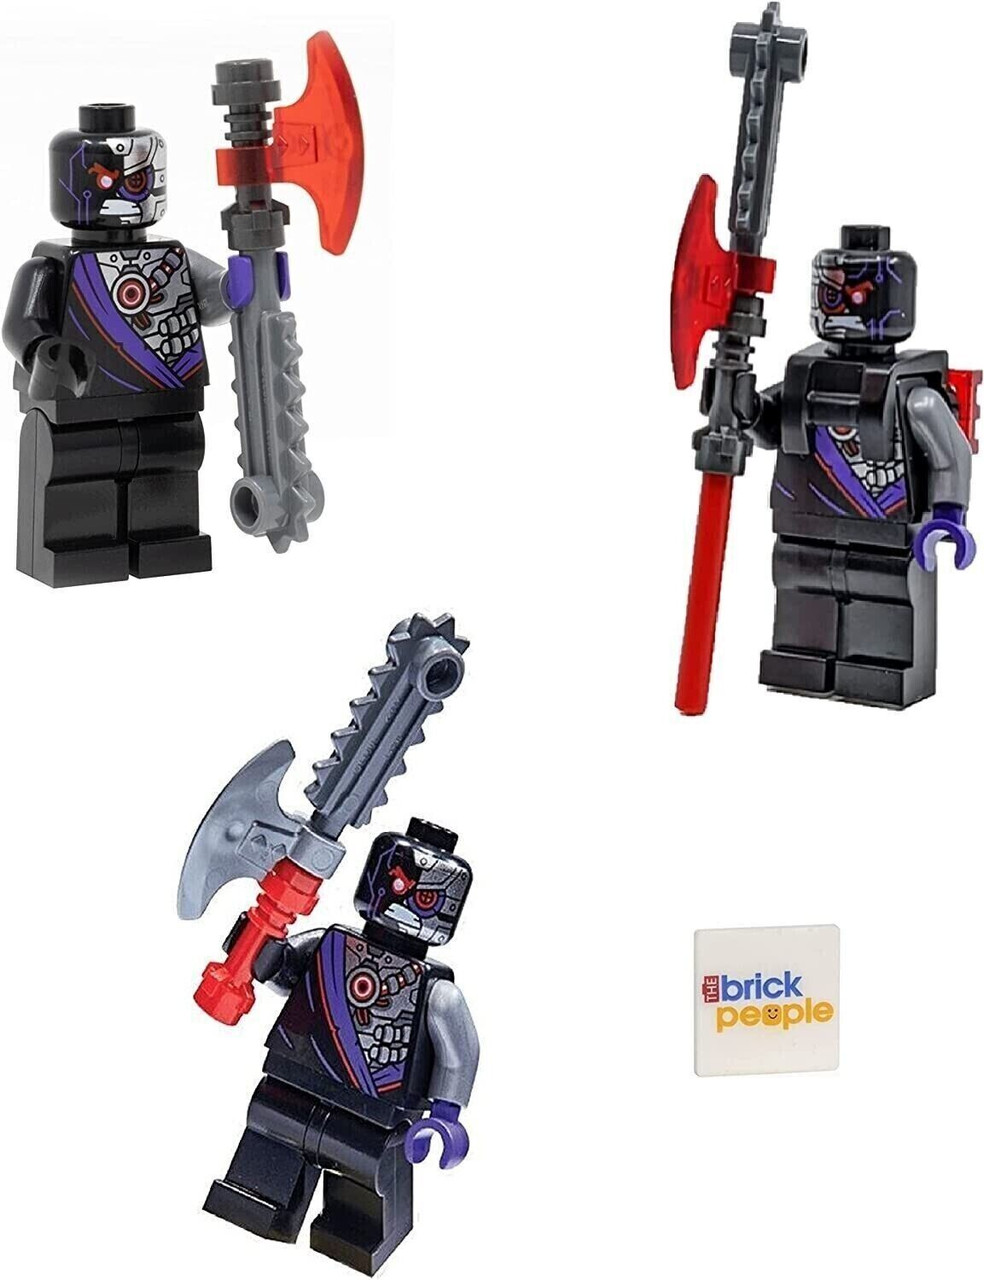 I made a cool update to my favorite Ninjago weapons, the Techno